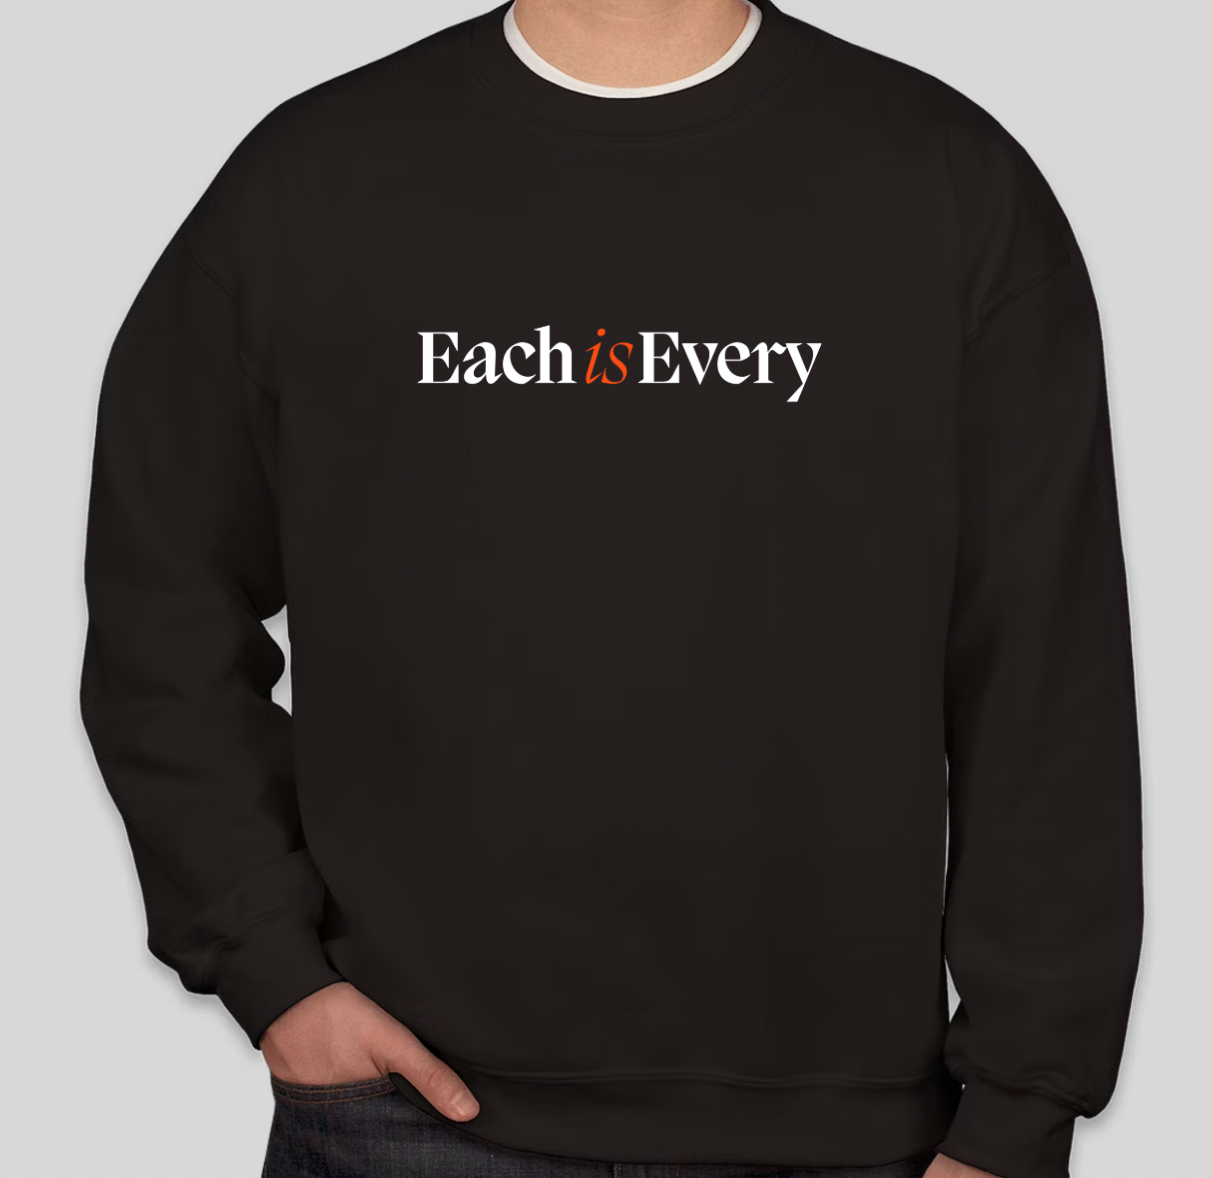 Each is Every Crewneck